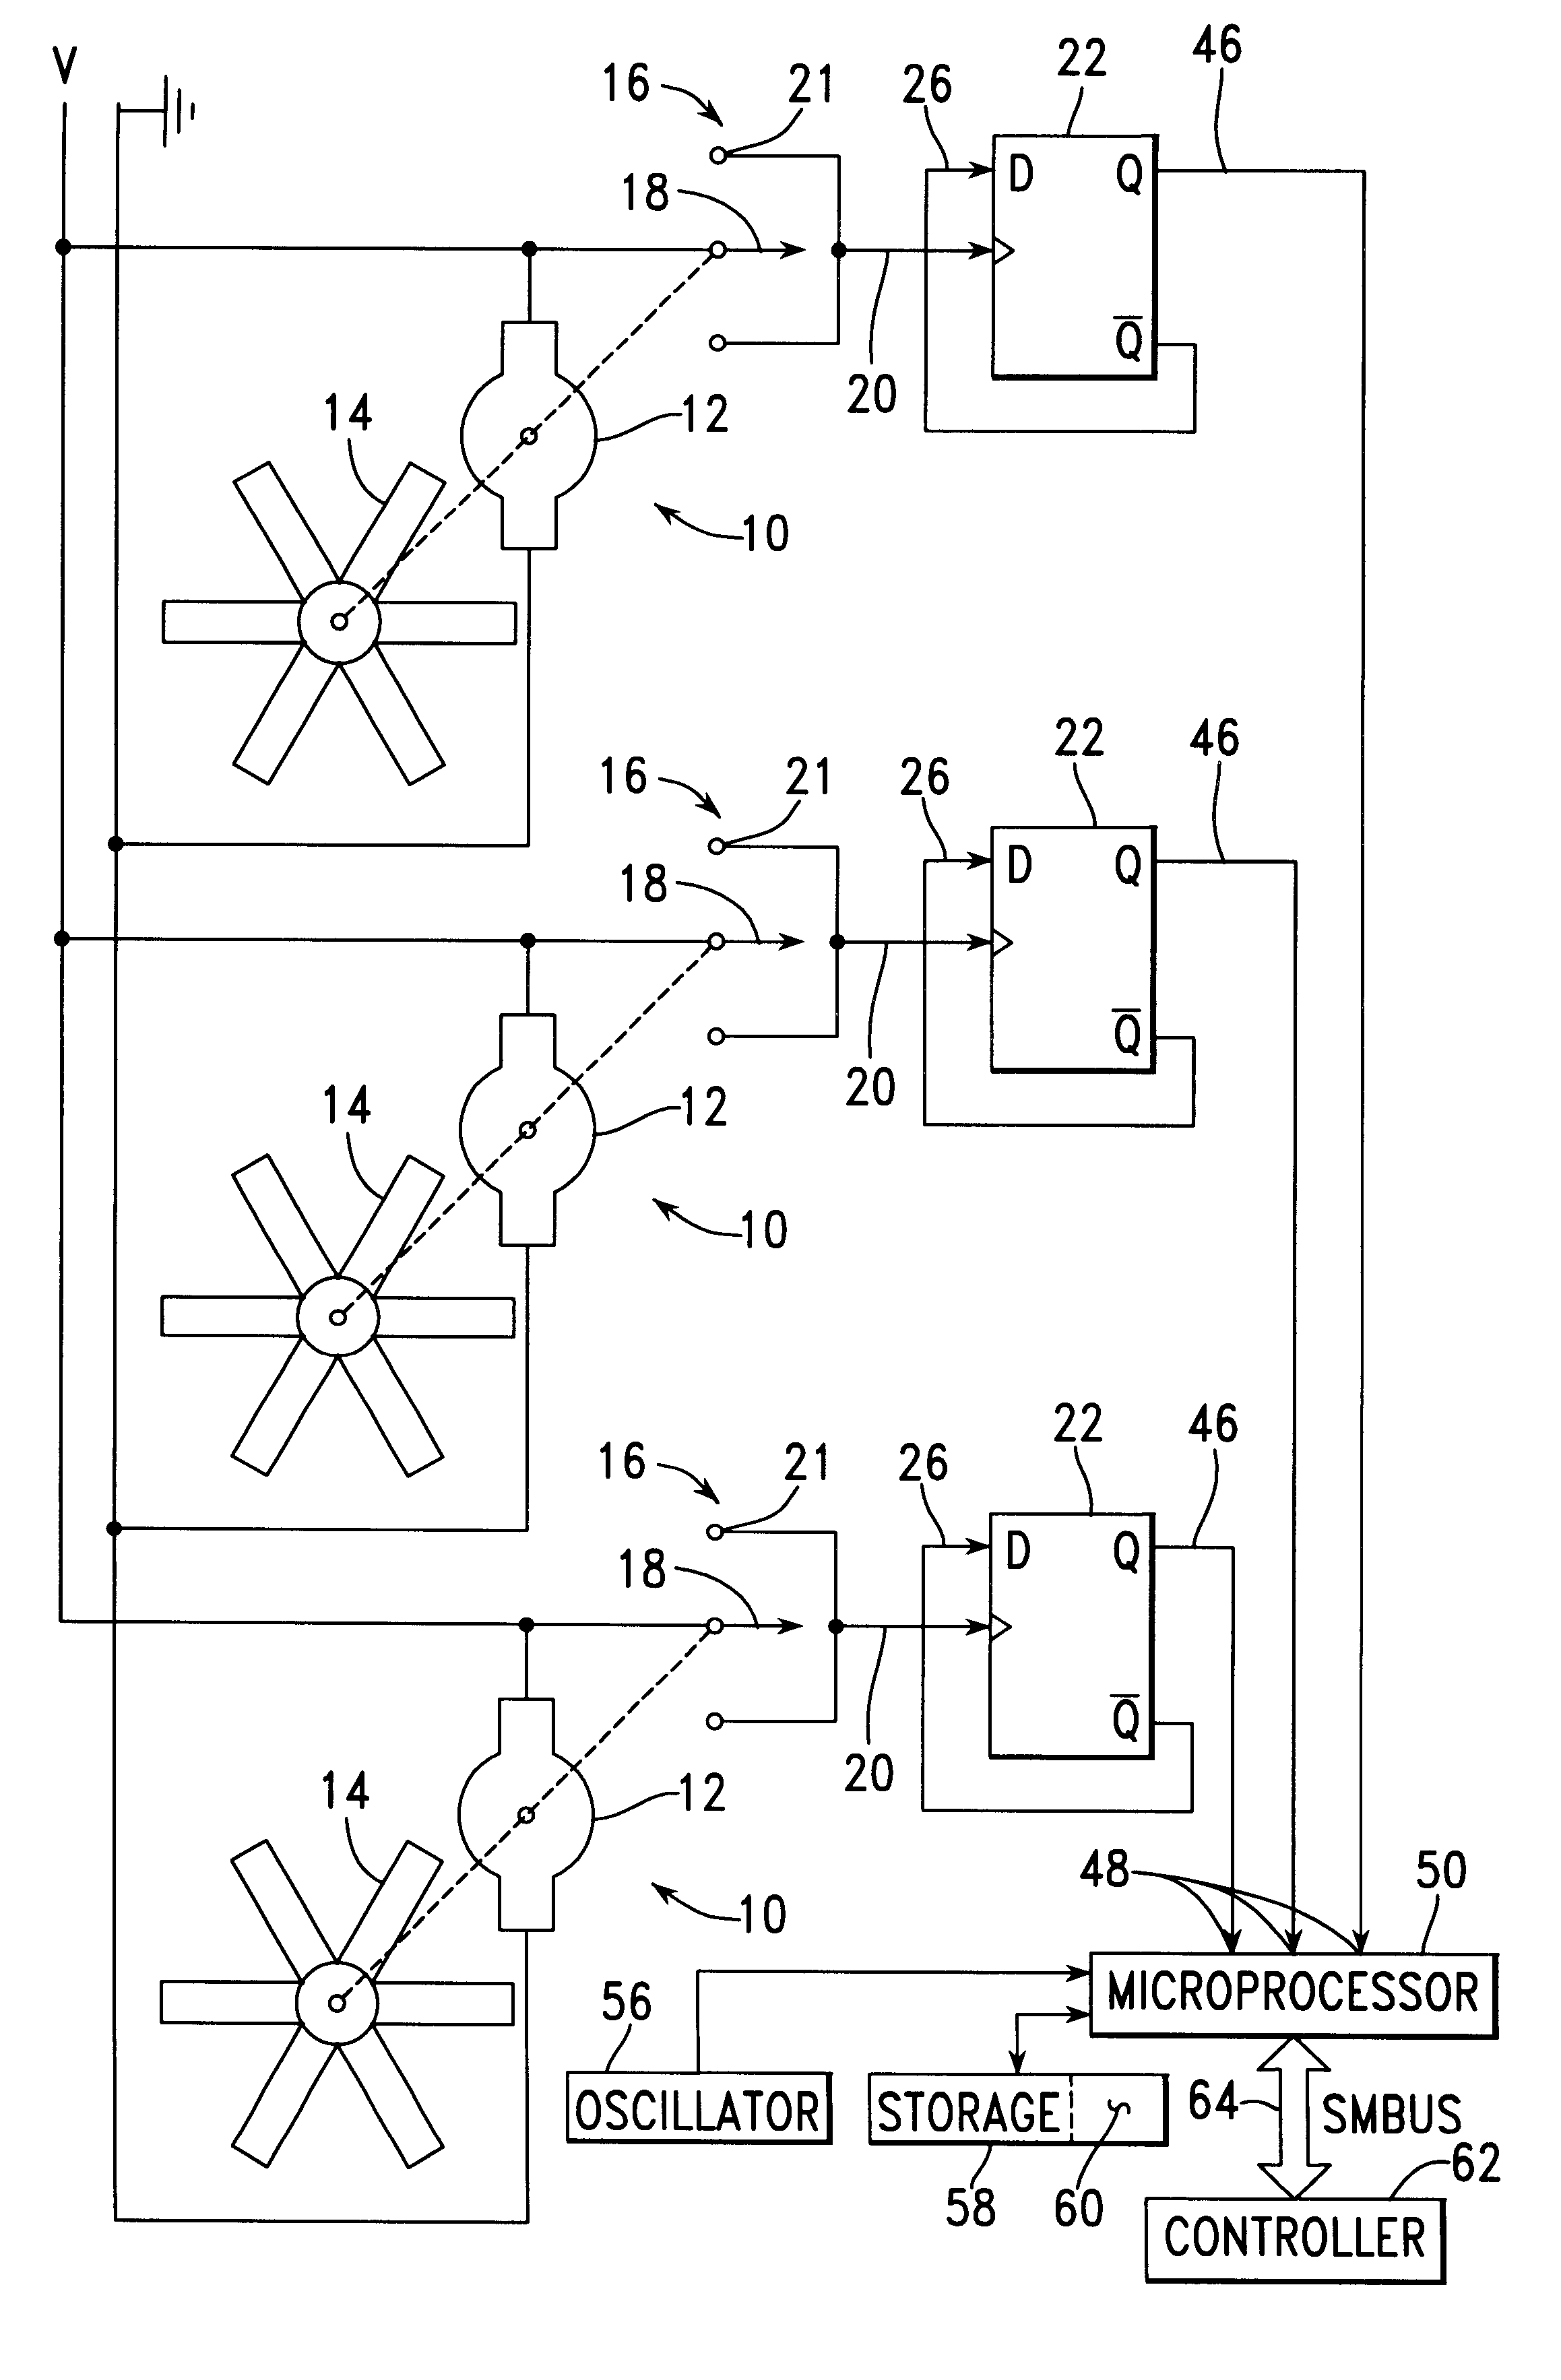 Apparatus and method for monitoring fan speeds within a computing system